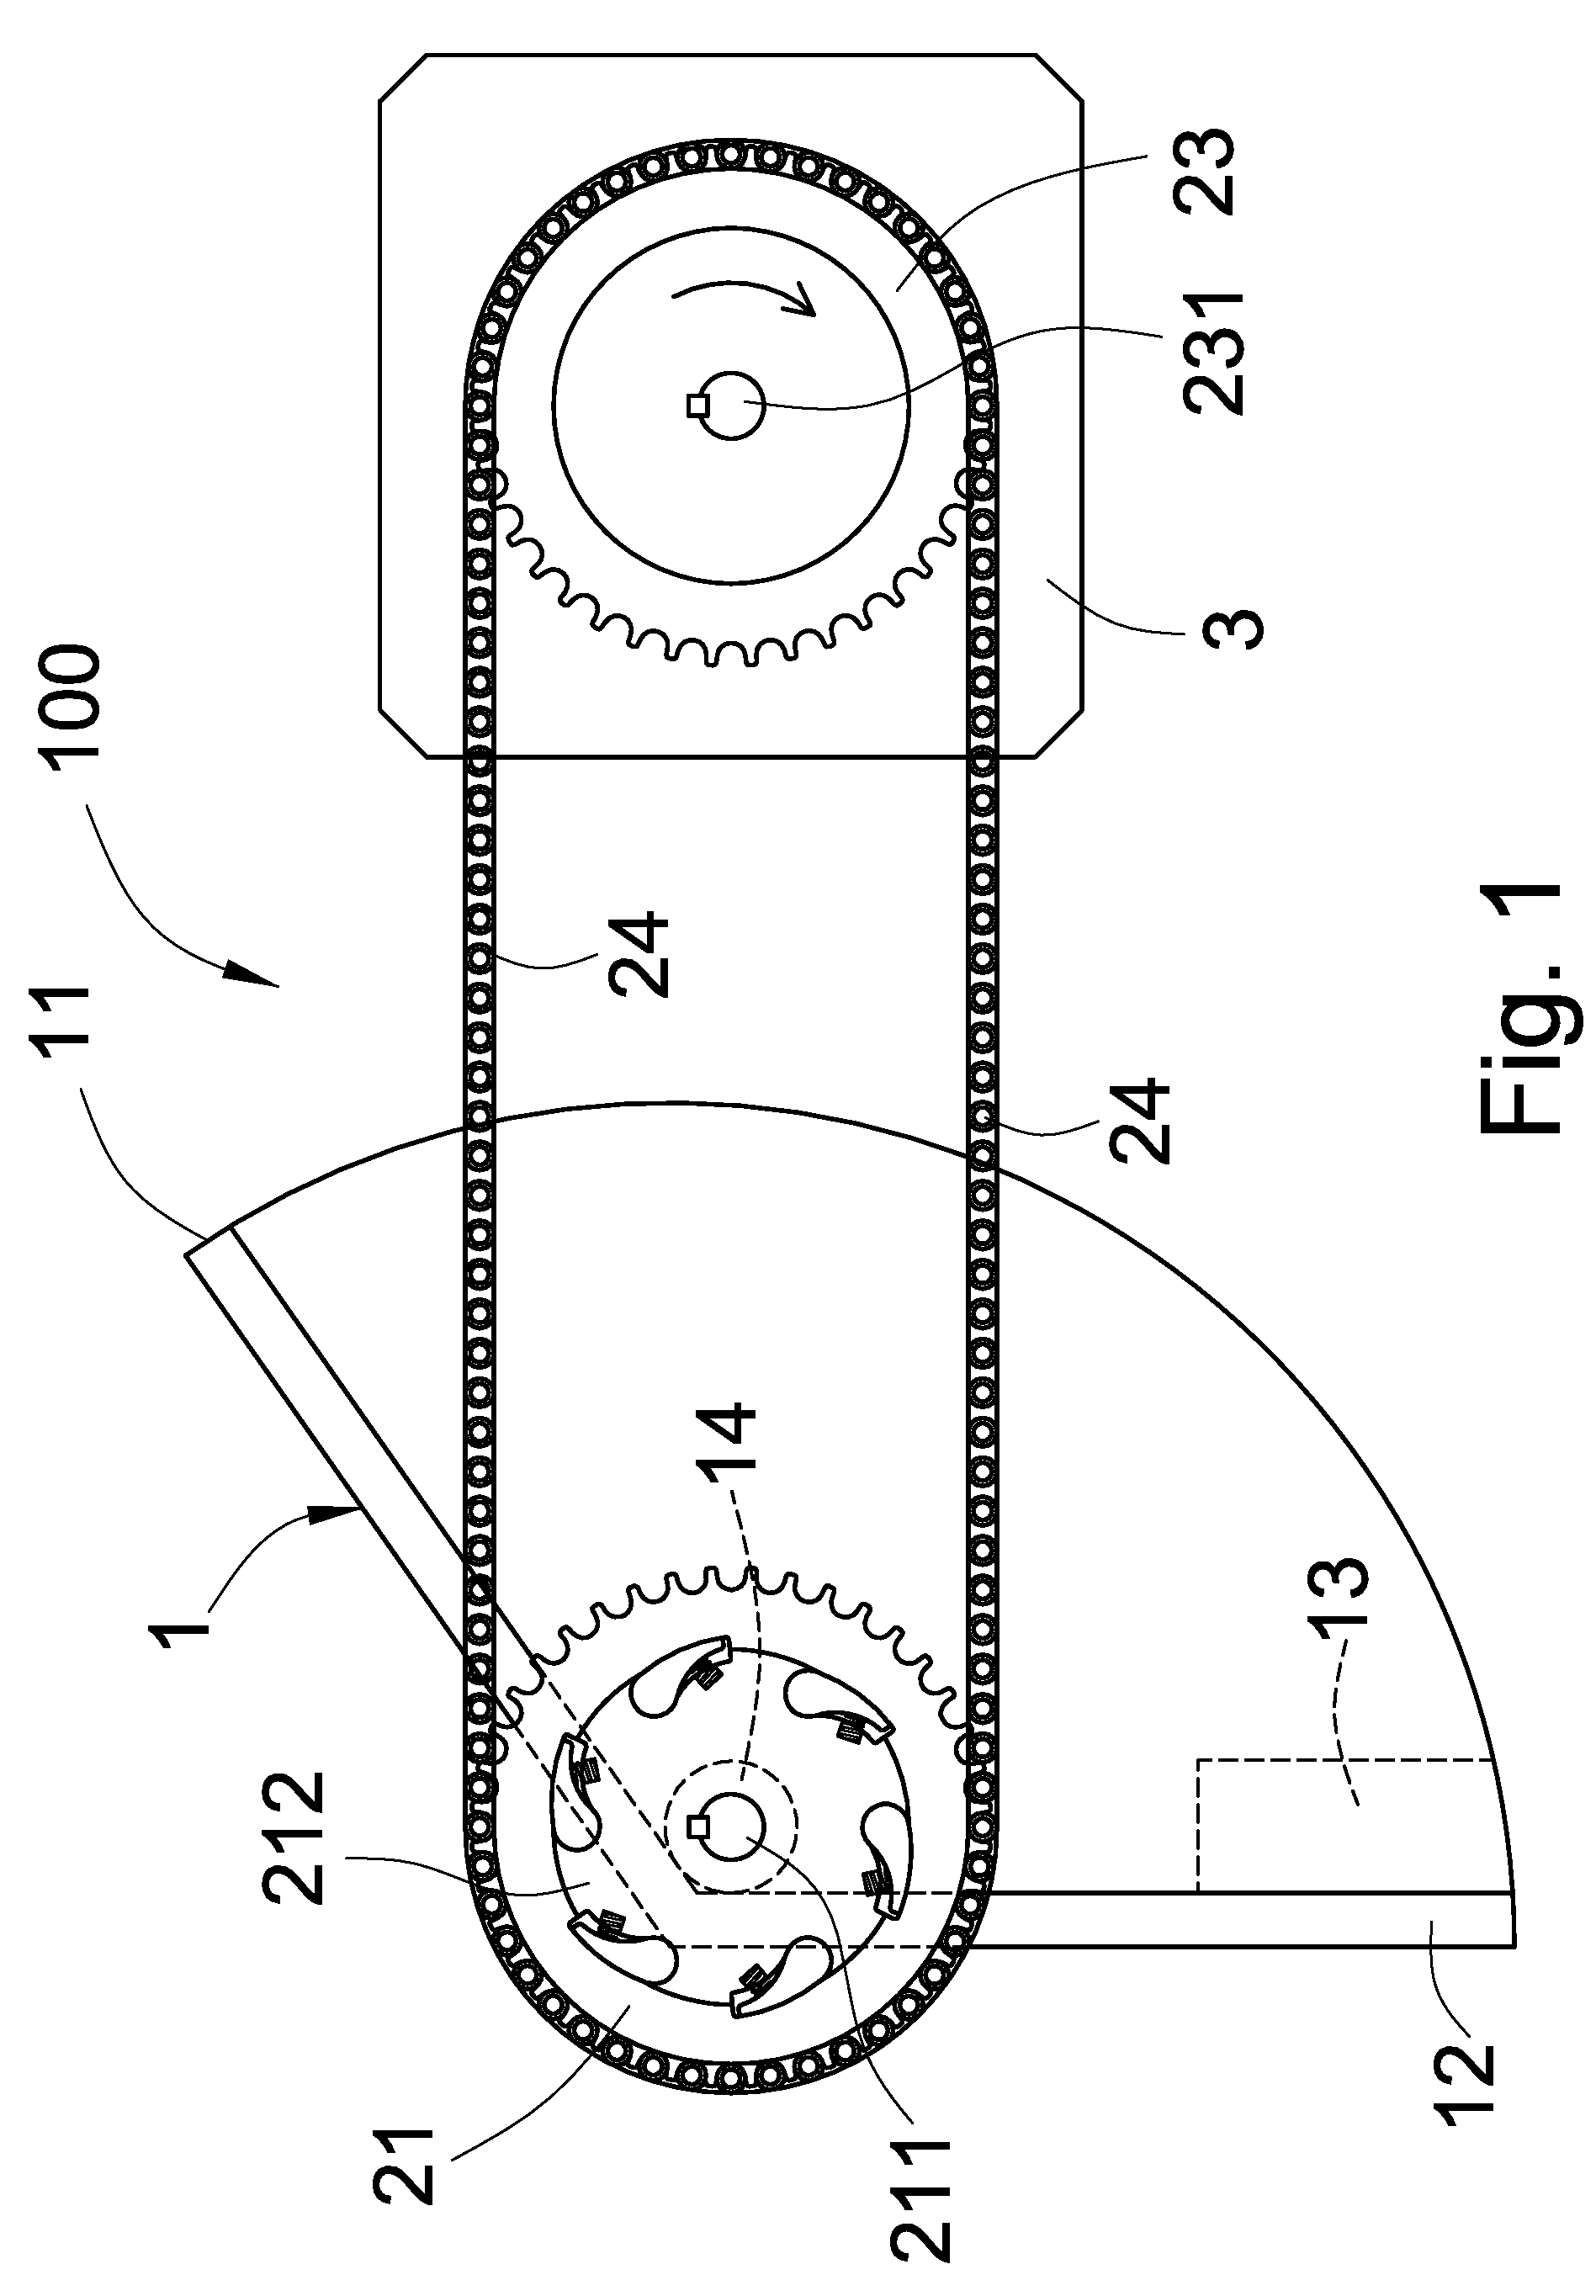 Electricity generating device by applying vehicle weight